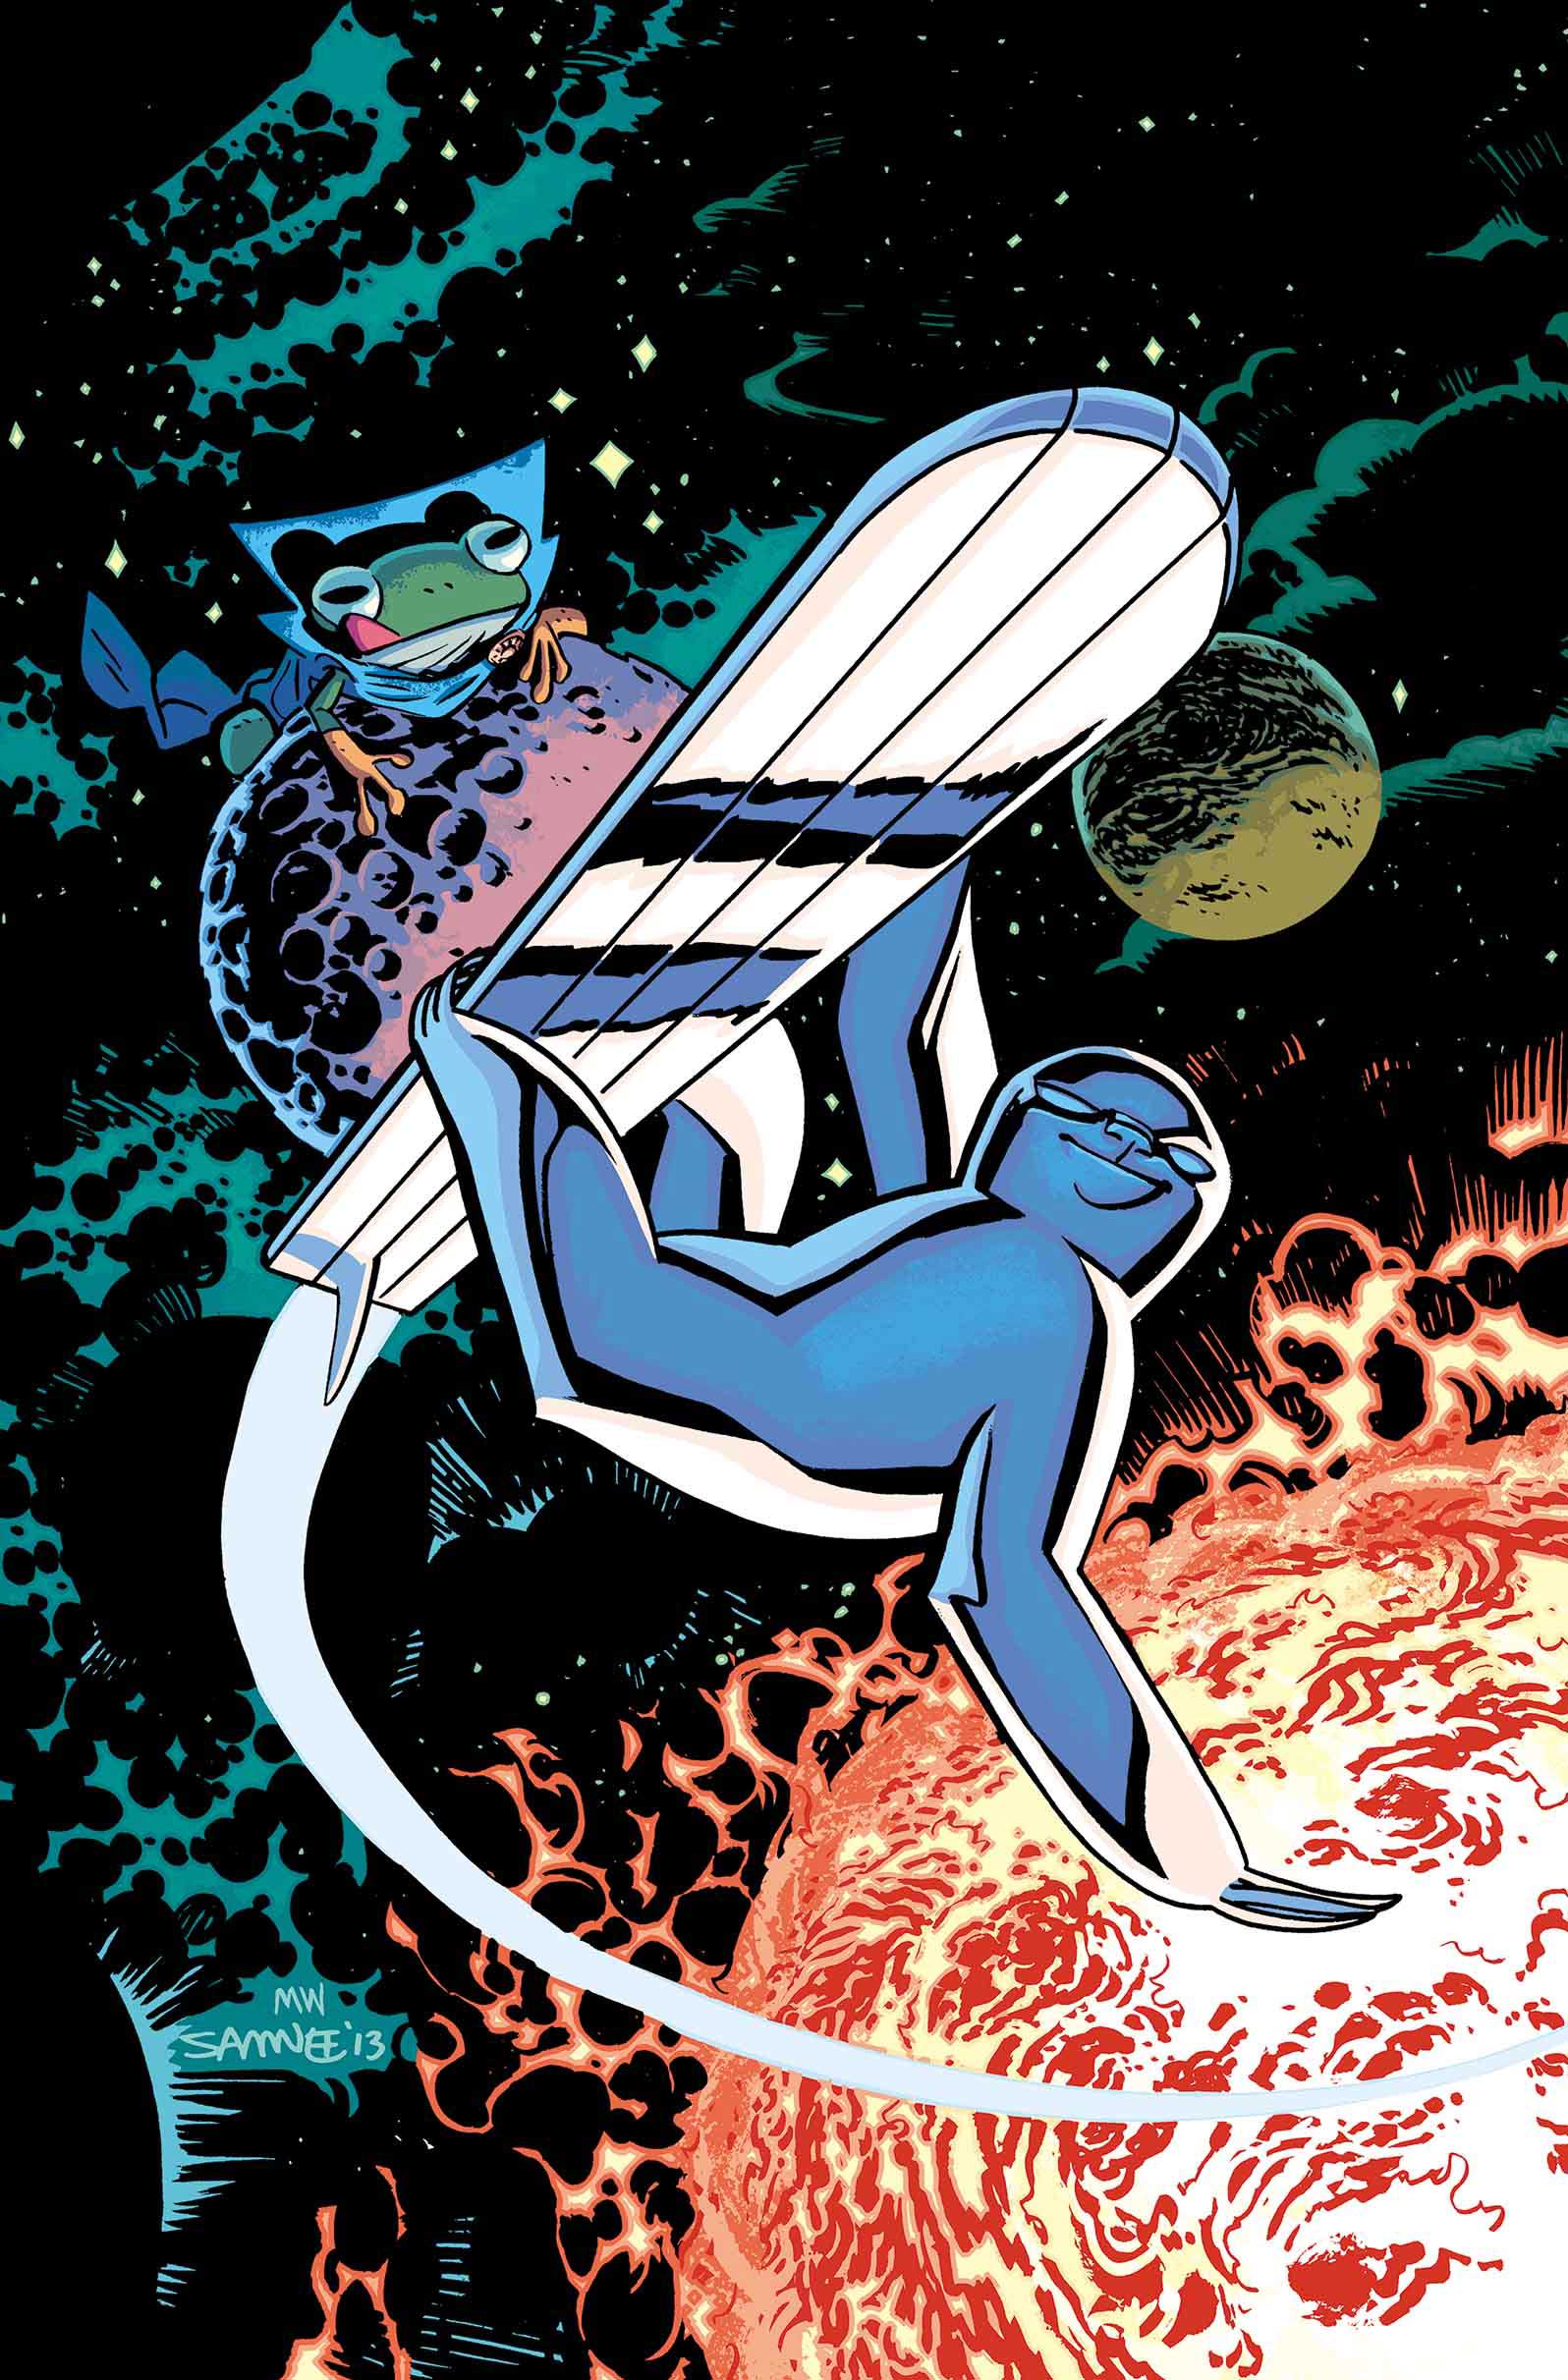 Silver Surfer #1 makes waves in March — Major Spoilers — Comic Book